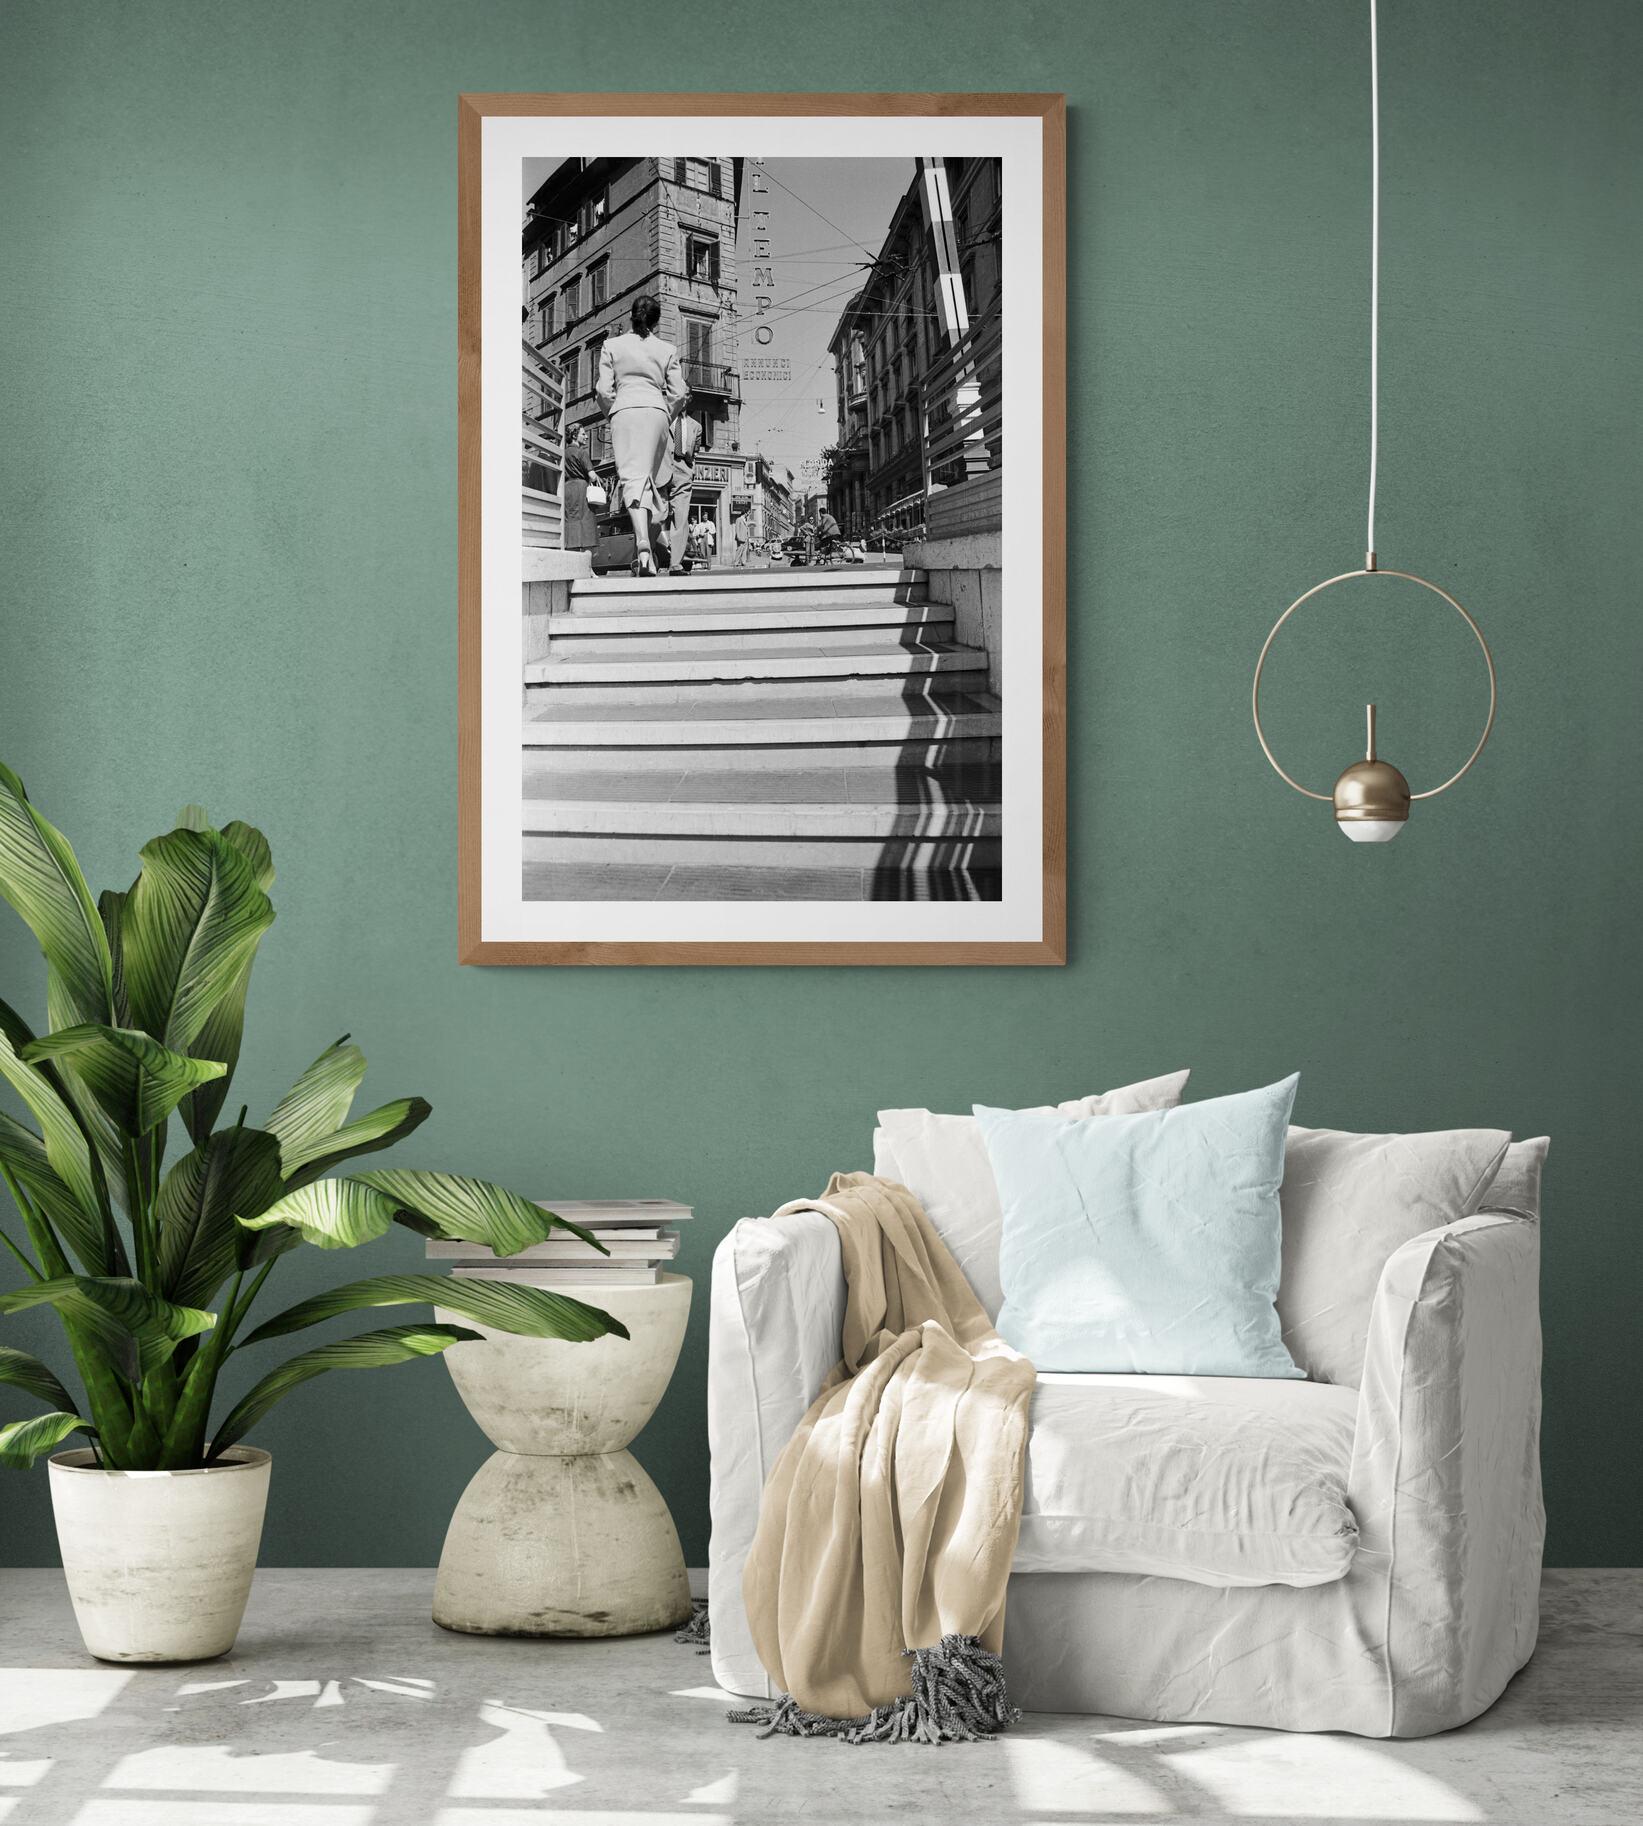 Artwork # 1 on 5 sold in limited edition in perfect condition 
On Via del Tritone, an elegant exit from the small underground passage which made it possible to avoid automobile traffic. A photo that has become a great classic. This print is part of